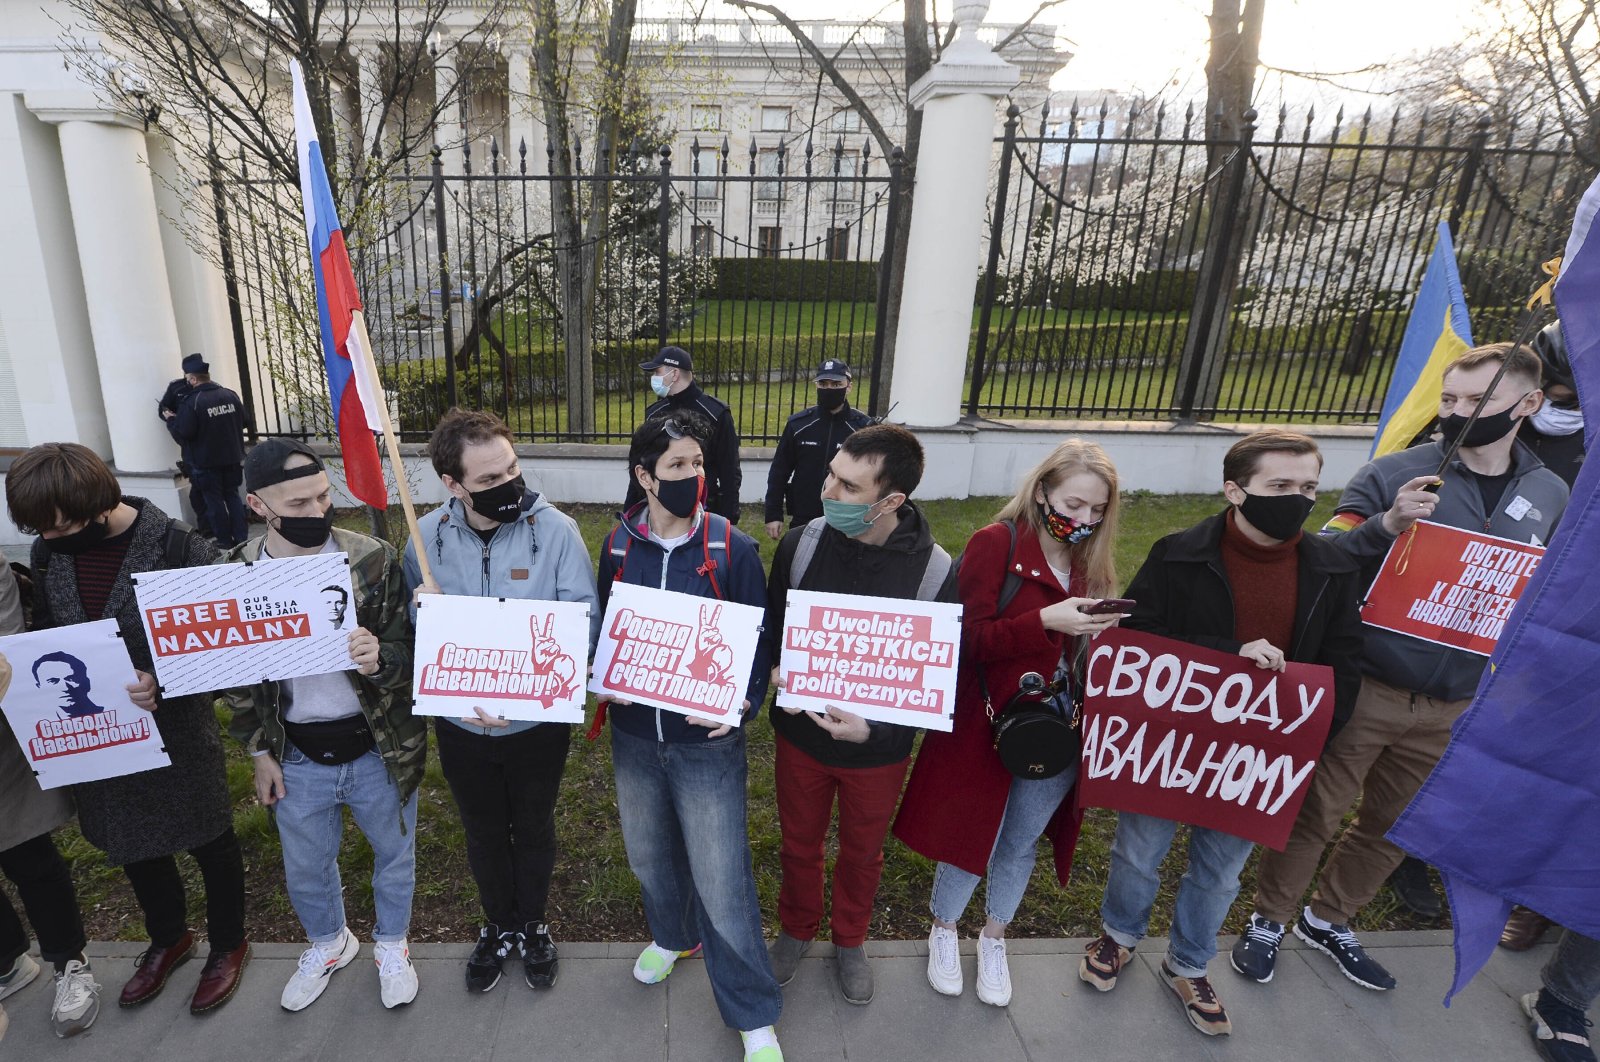 Supporters of imprisoned Russian opposition leader Alexei Navalny stage a protest before the Russian Embassy in Warsaw, Poland, Wednesday, April 21, 2021. (AP Photo)